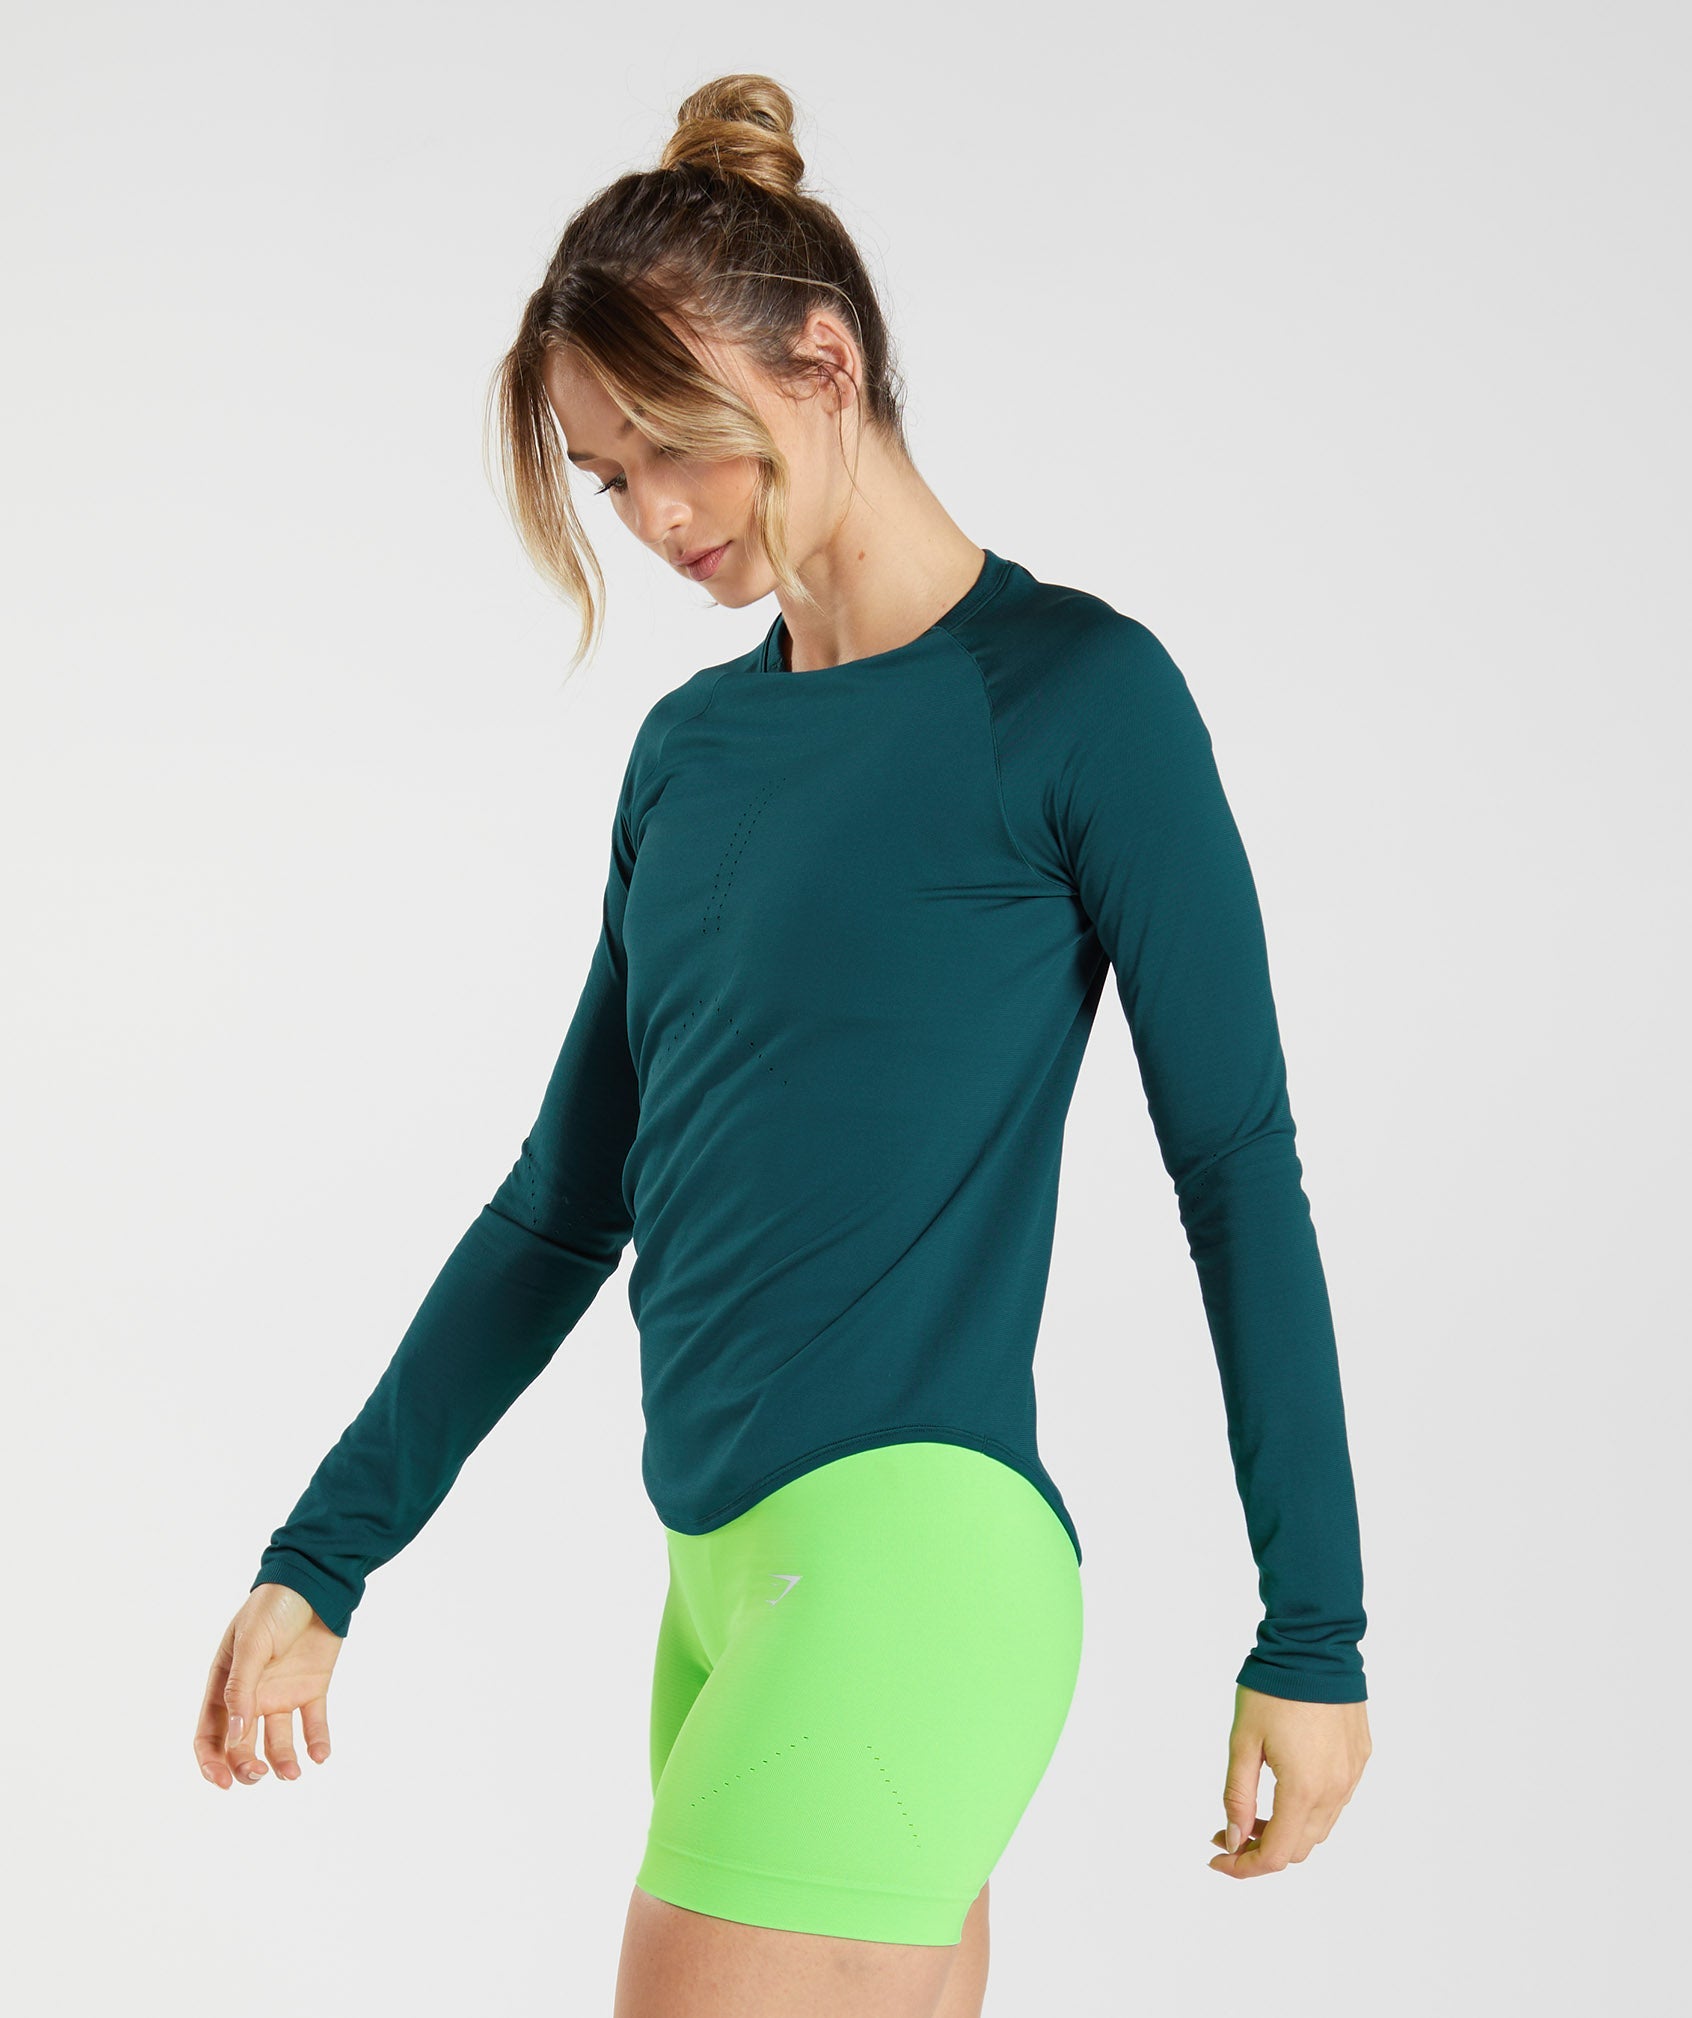 Sweat Seamless Long Sleeve Top in Winter Teal - view 3